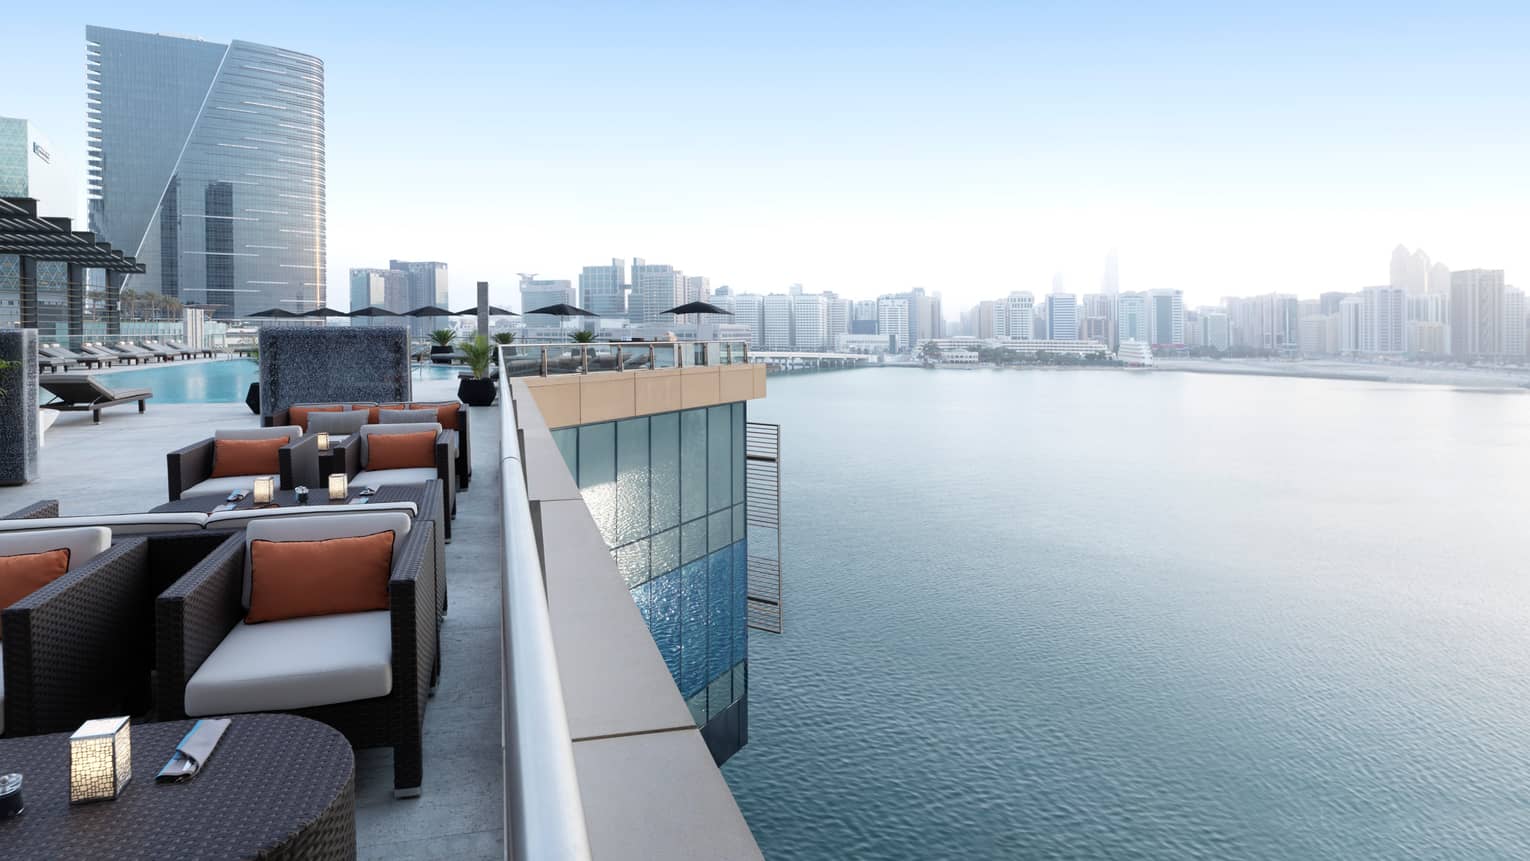 Rooftop lounge with stylish black wicker armchairs, cushions, candles on tables, swimming pool, overlooking Arabian Gulf